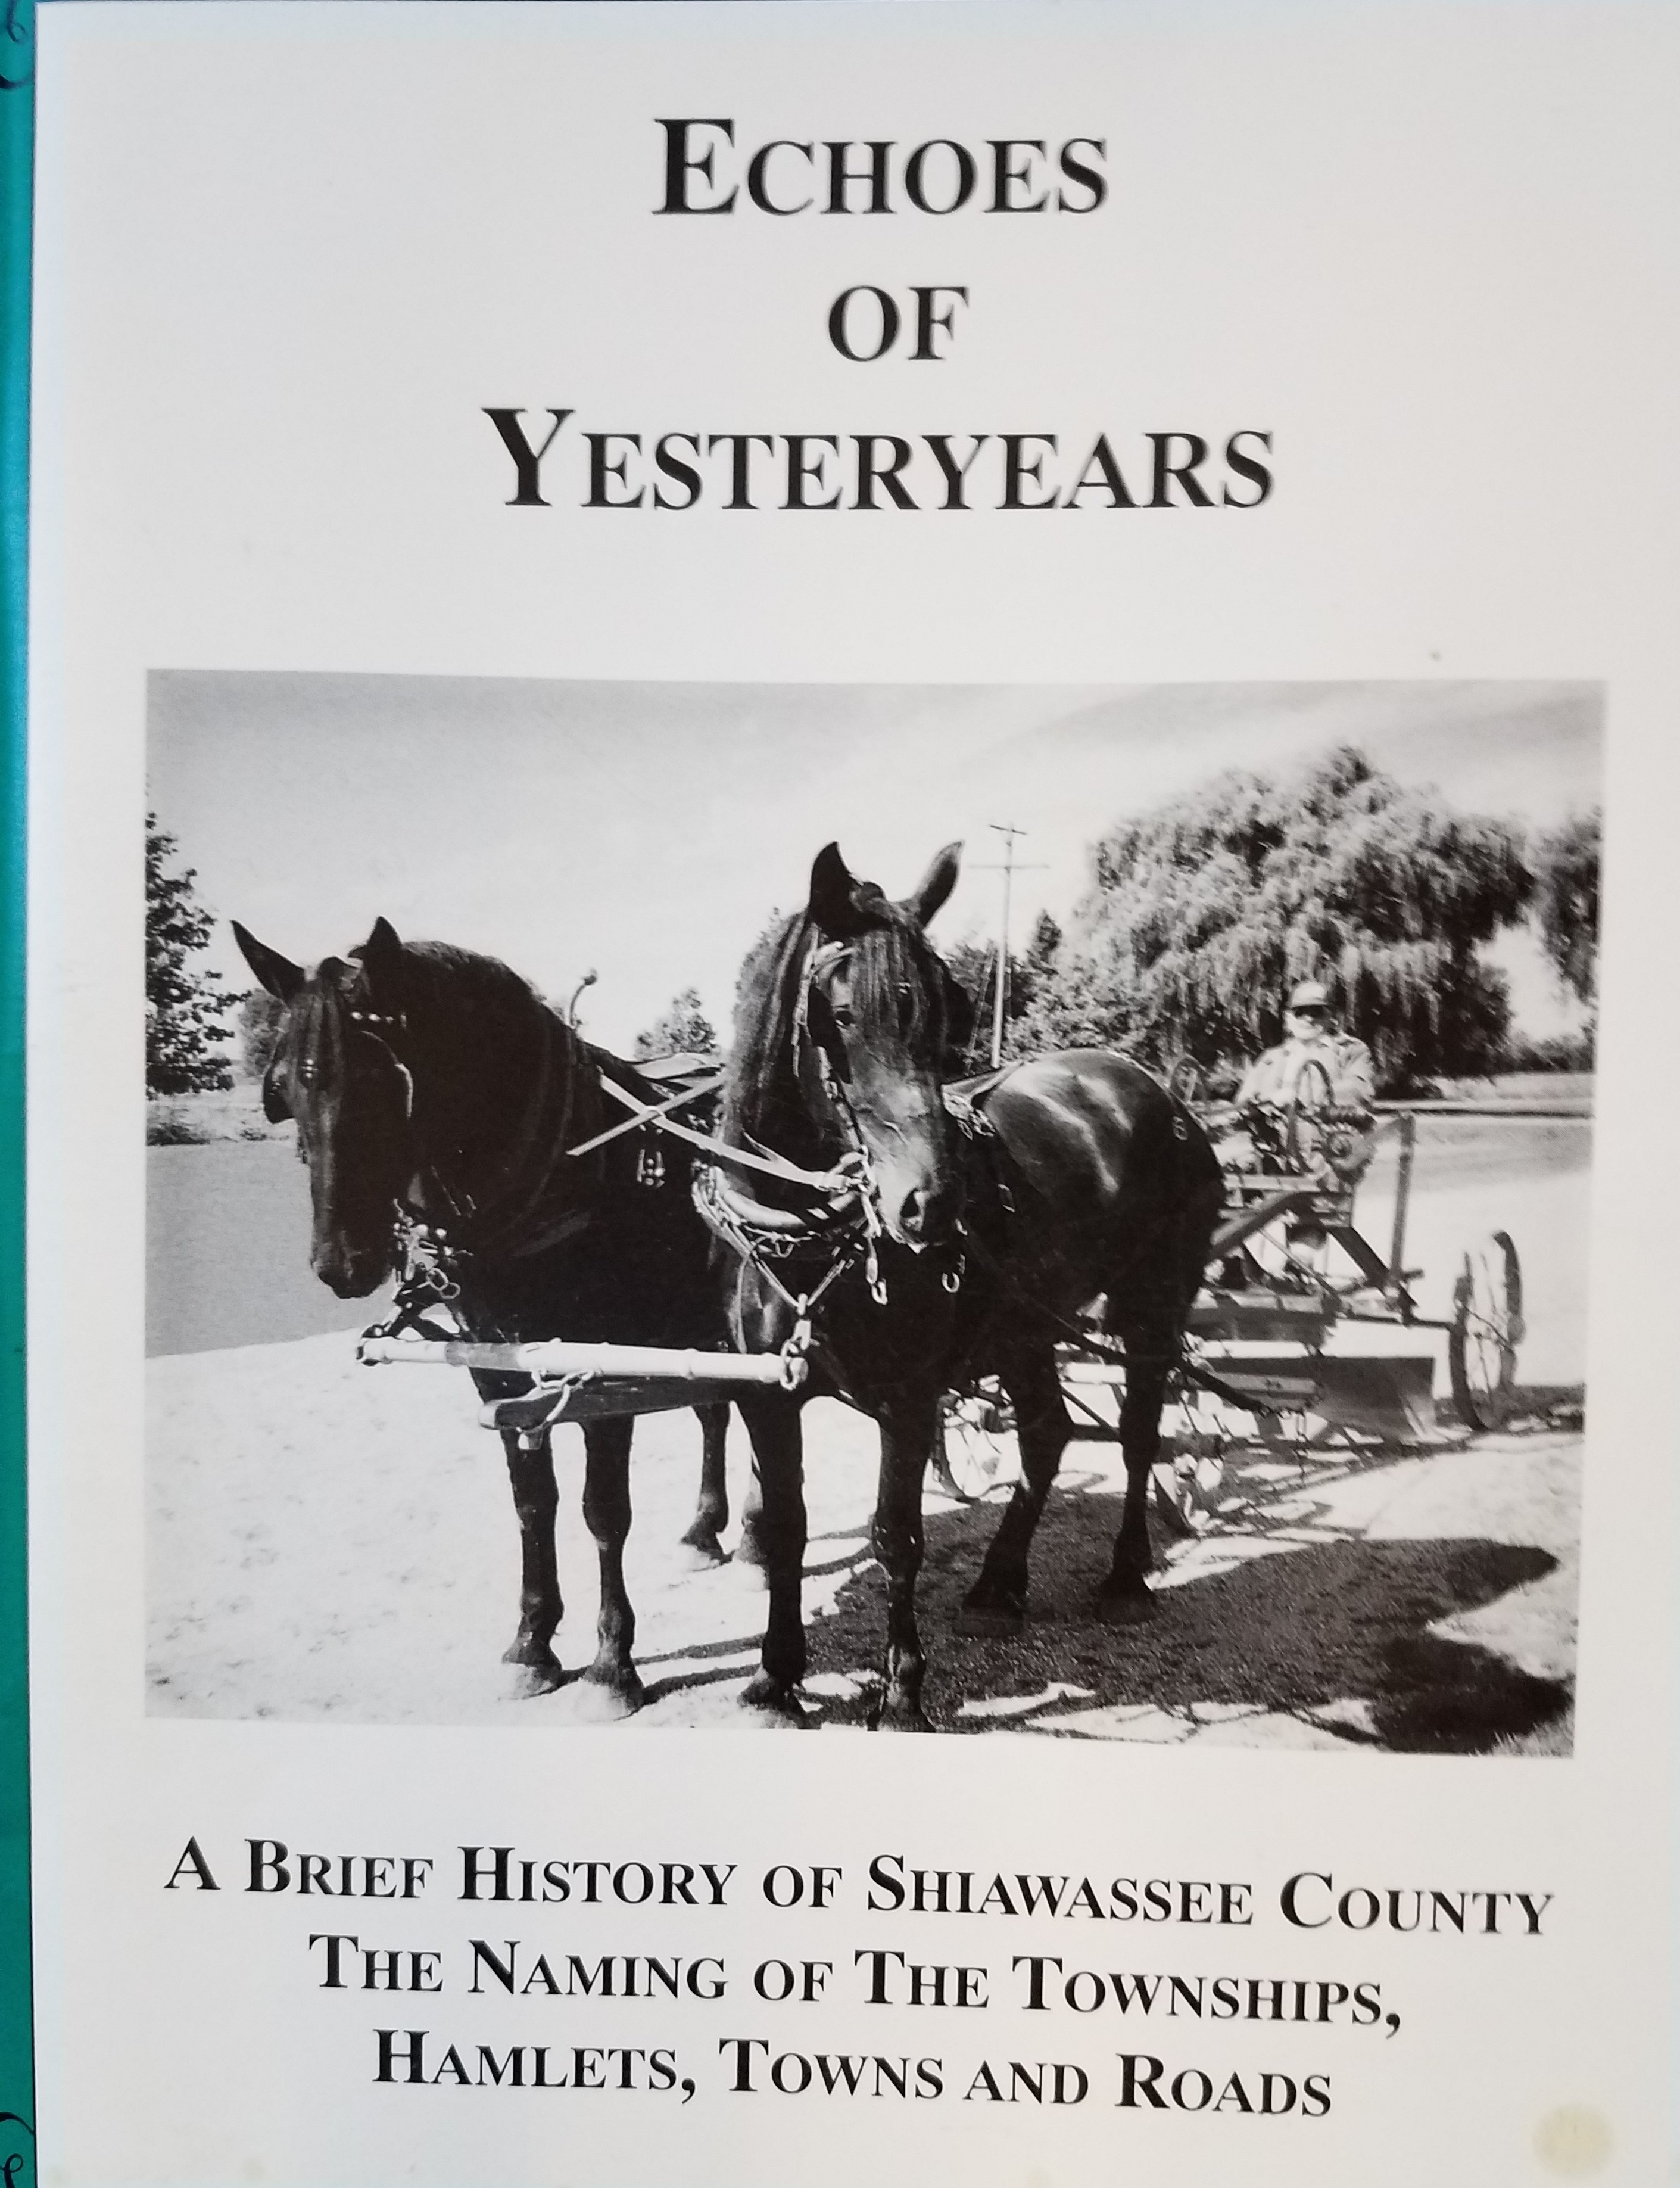 Echoes of Yesteryears book cover with horse and buggy.